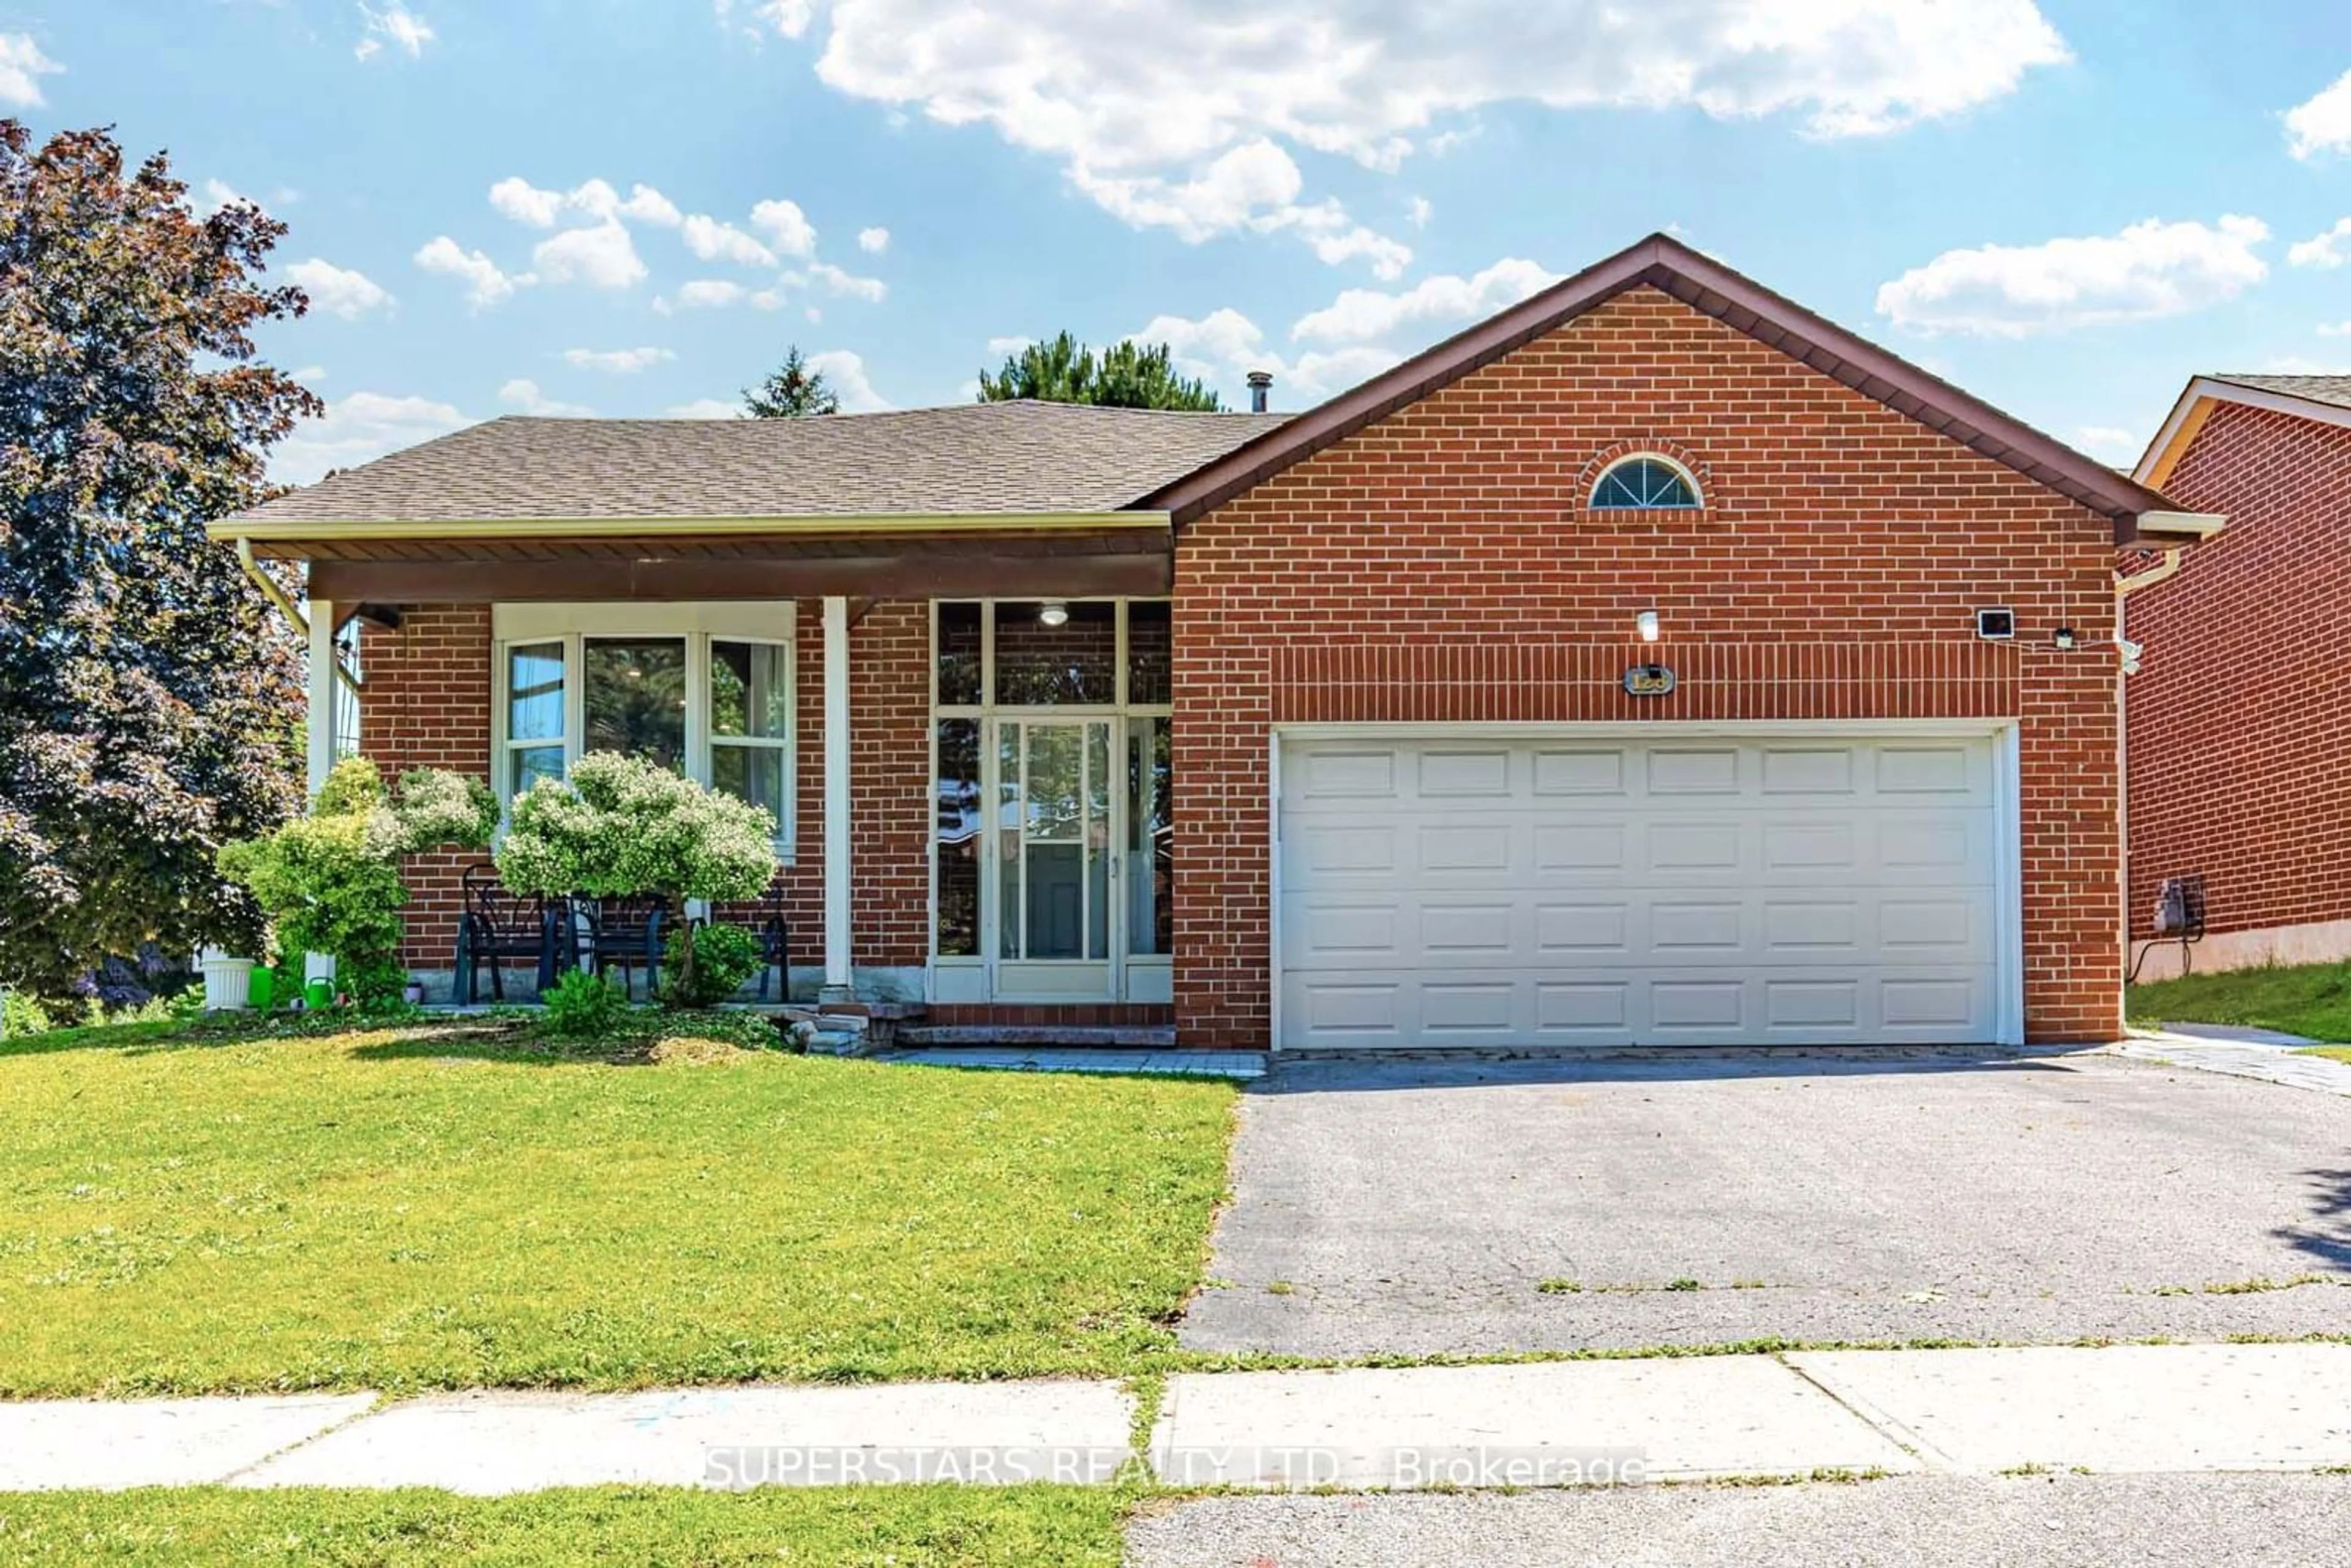 Home with brick exterior material for 128 Kingston Rd, Newmarket Ontario L3Y 5W7